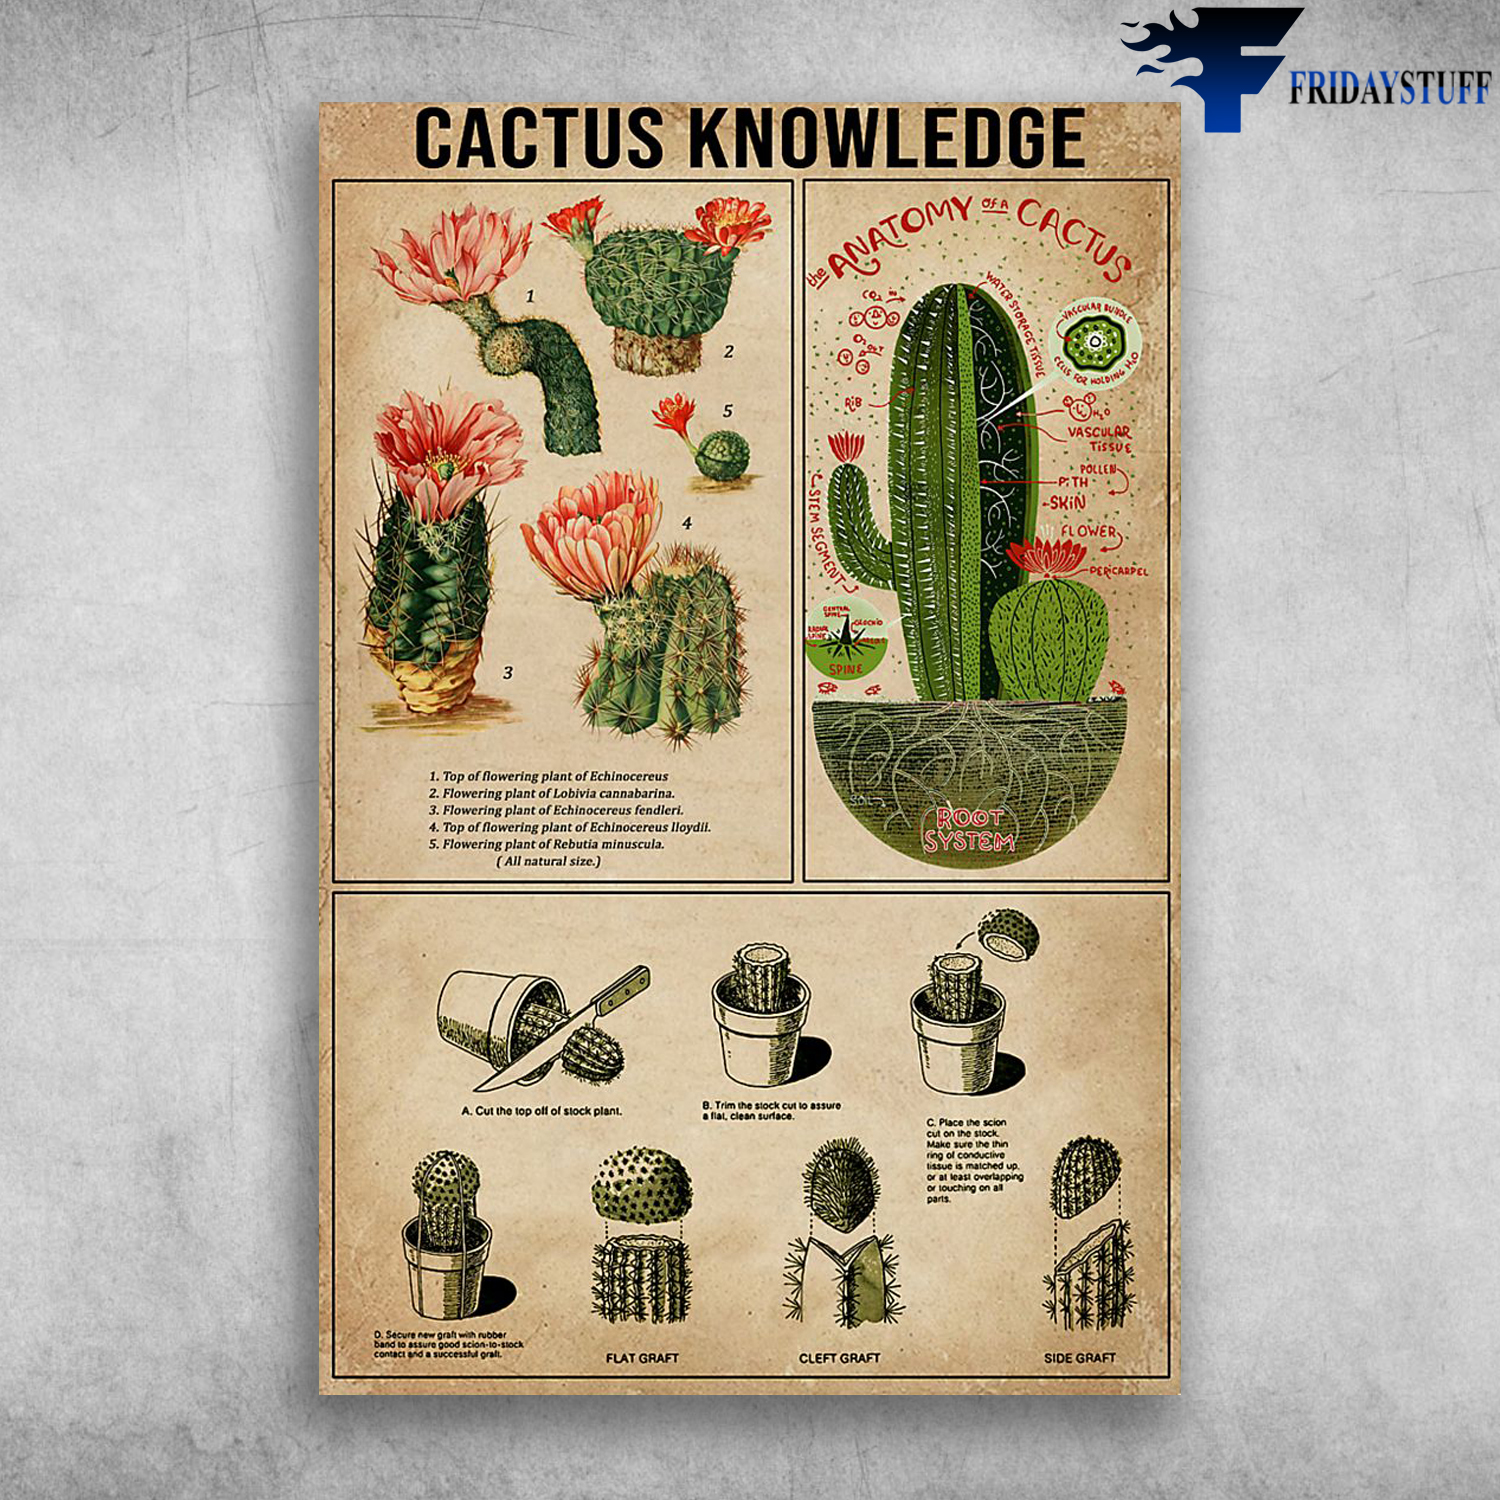 Cactus Knowledge The Anatomy Of A Cactus